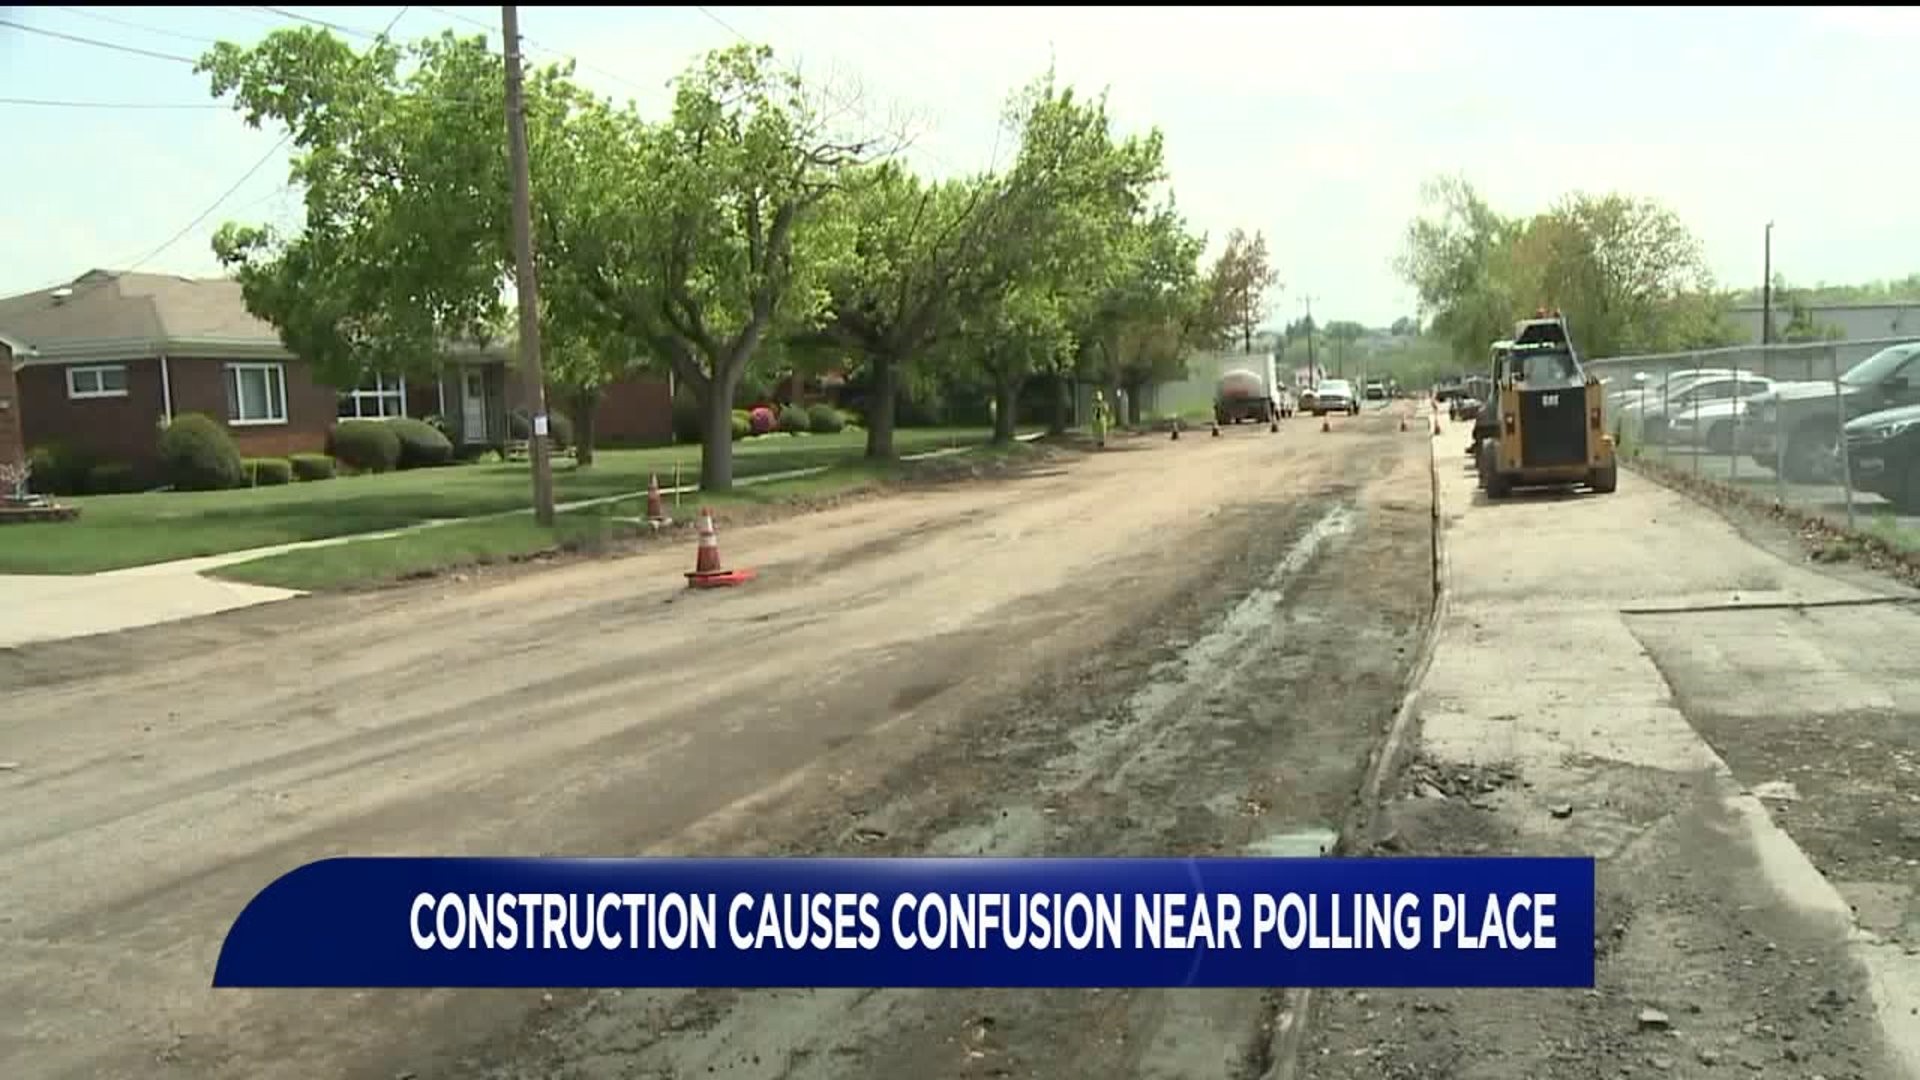 Construction Causes Confusion near Polling Place